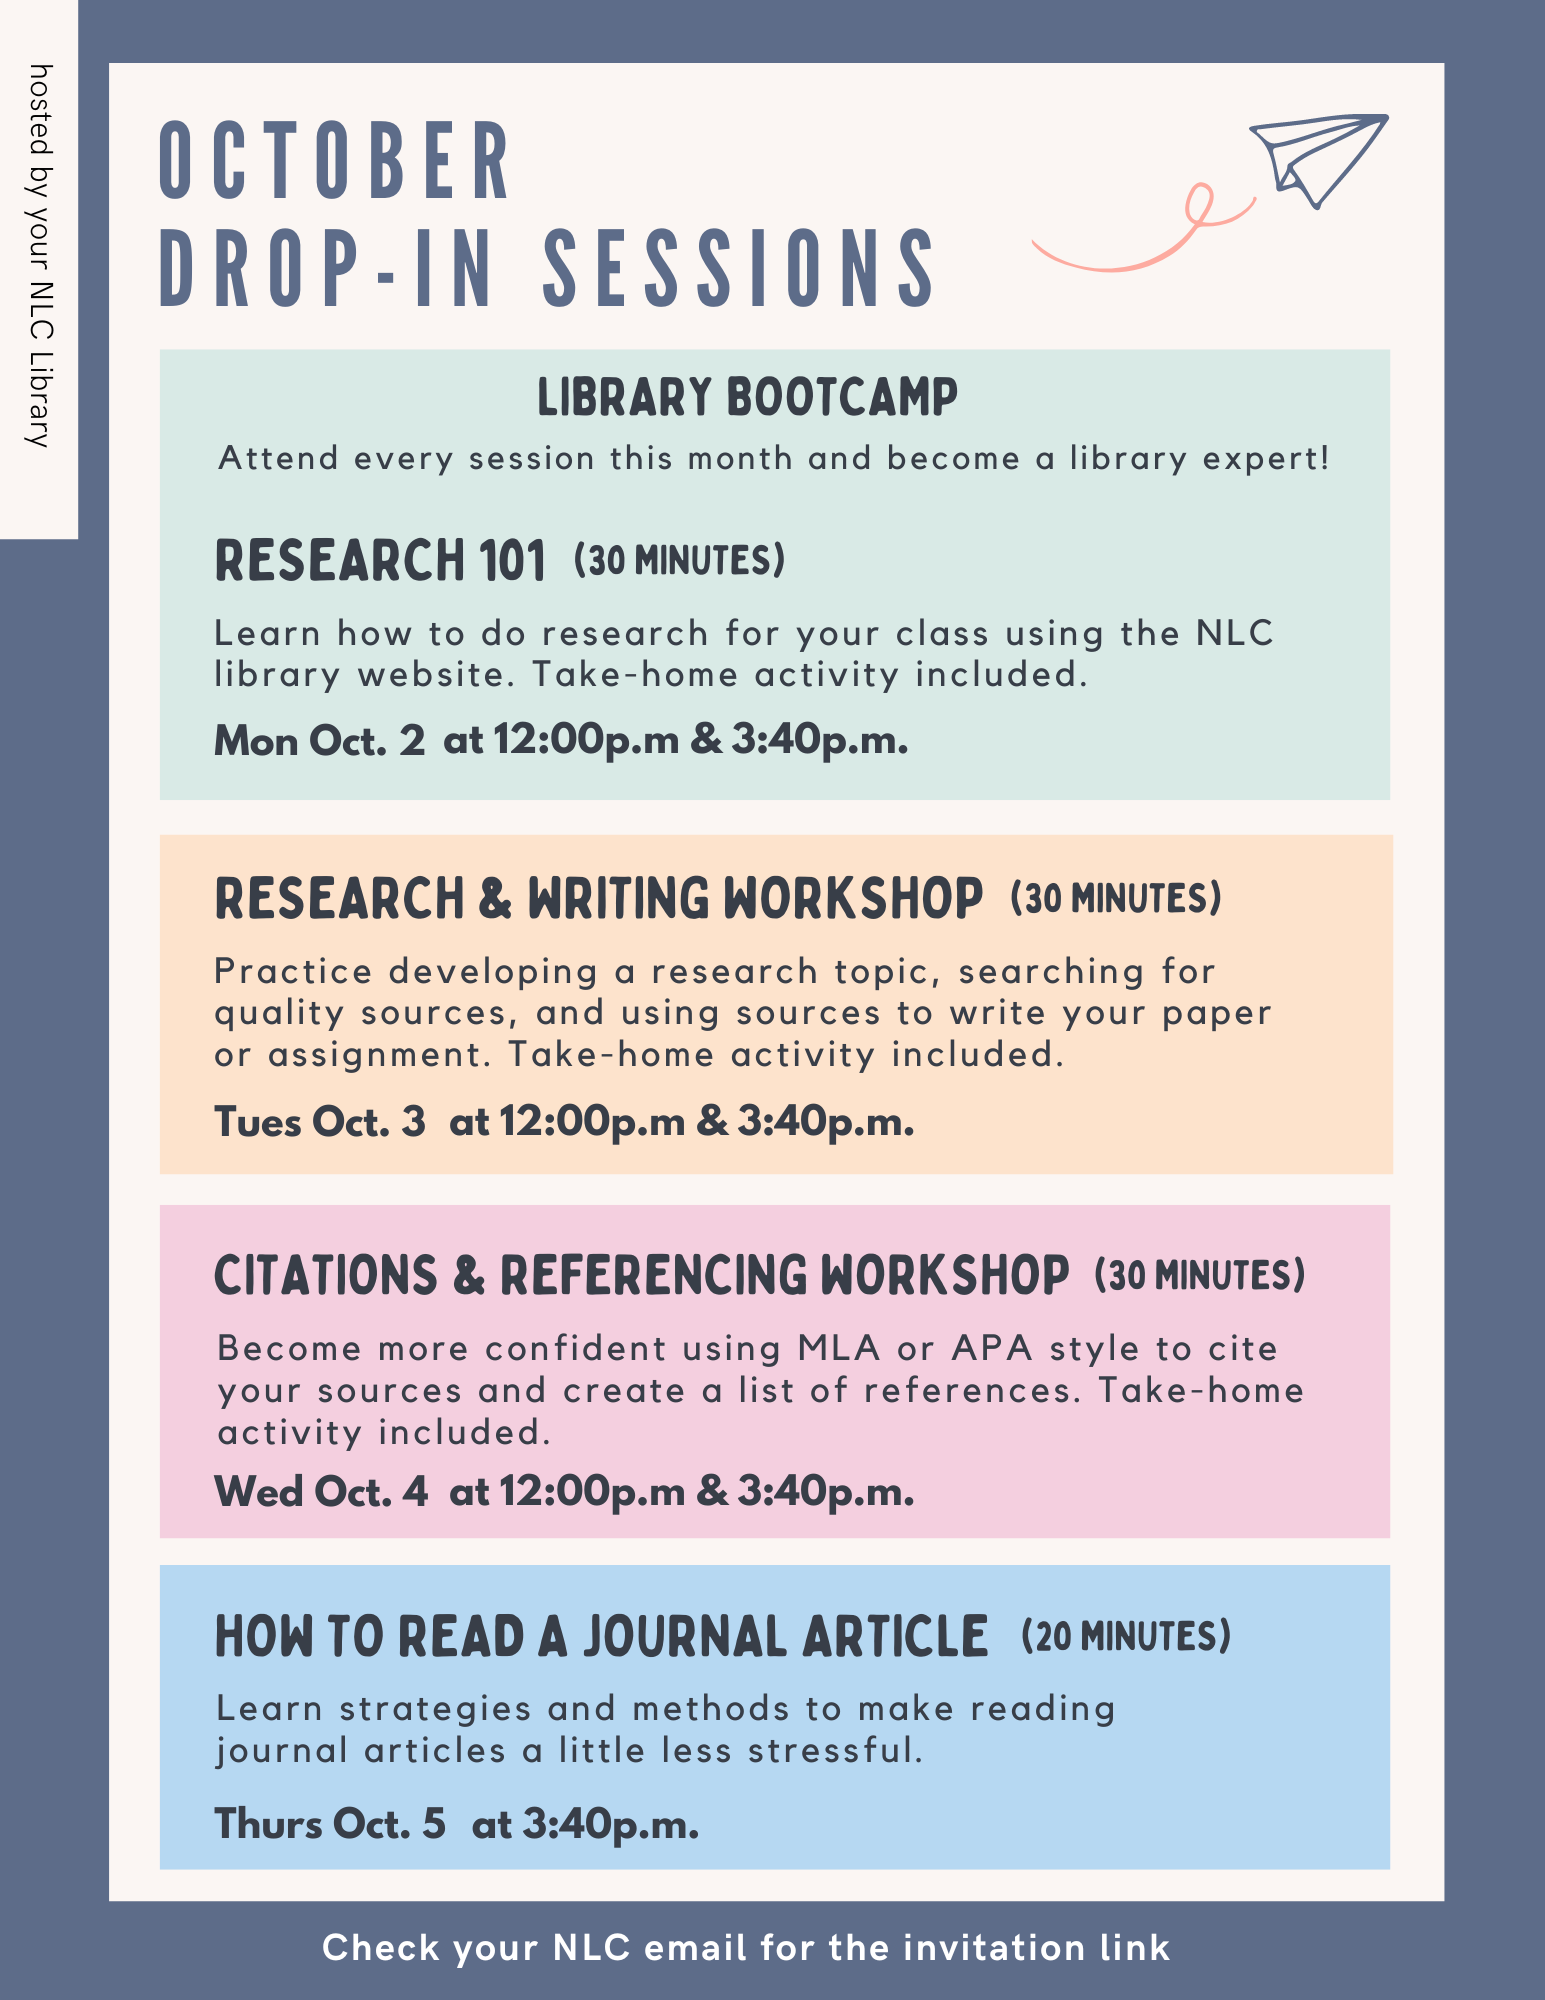 Library Bootcamp. 30-minute sessions. Research 101 October 2nd 12:00pm & 3:40pm. Research and Writing Workshop October 3rd 12:00pm and 3:40pm. Citations & Referencing Workshop October 4th 12:00pm & 3:40pm. How to Read a Journal Article October 5th 3:40pm